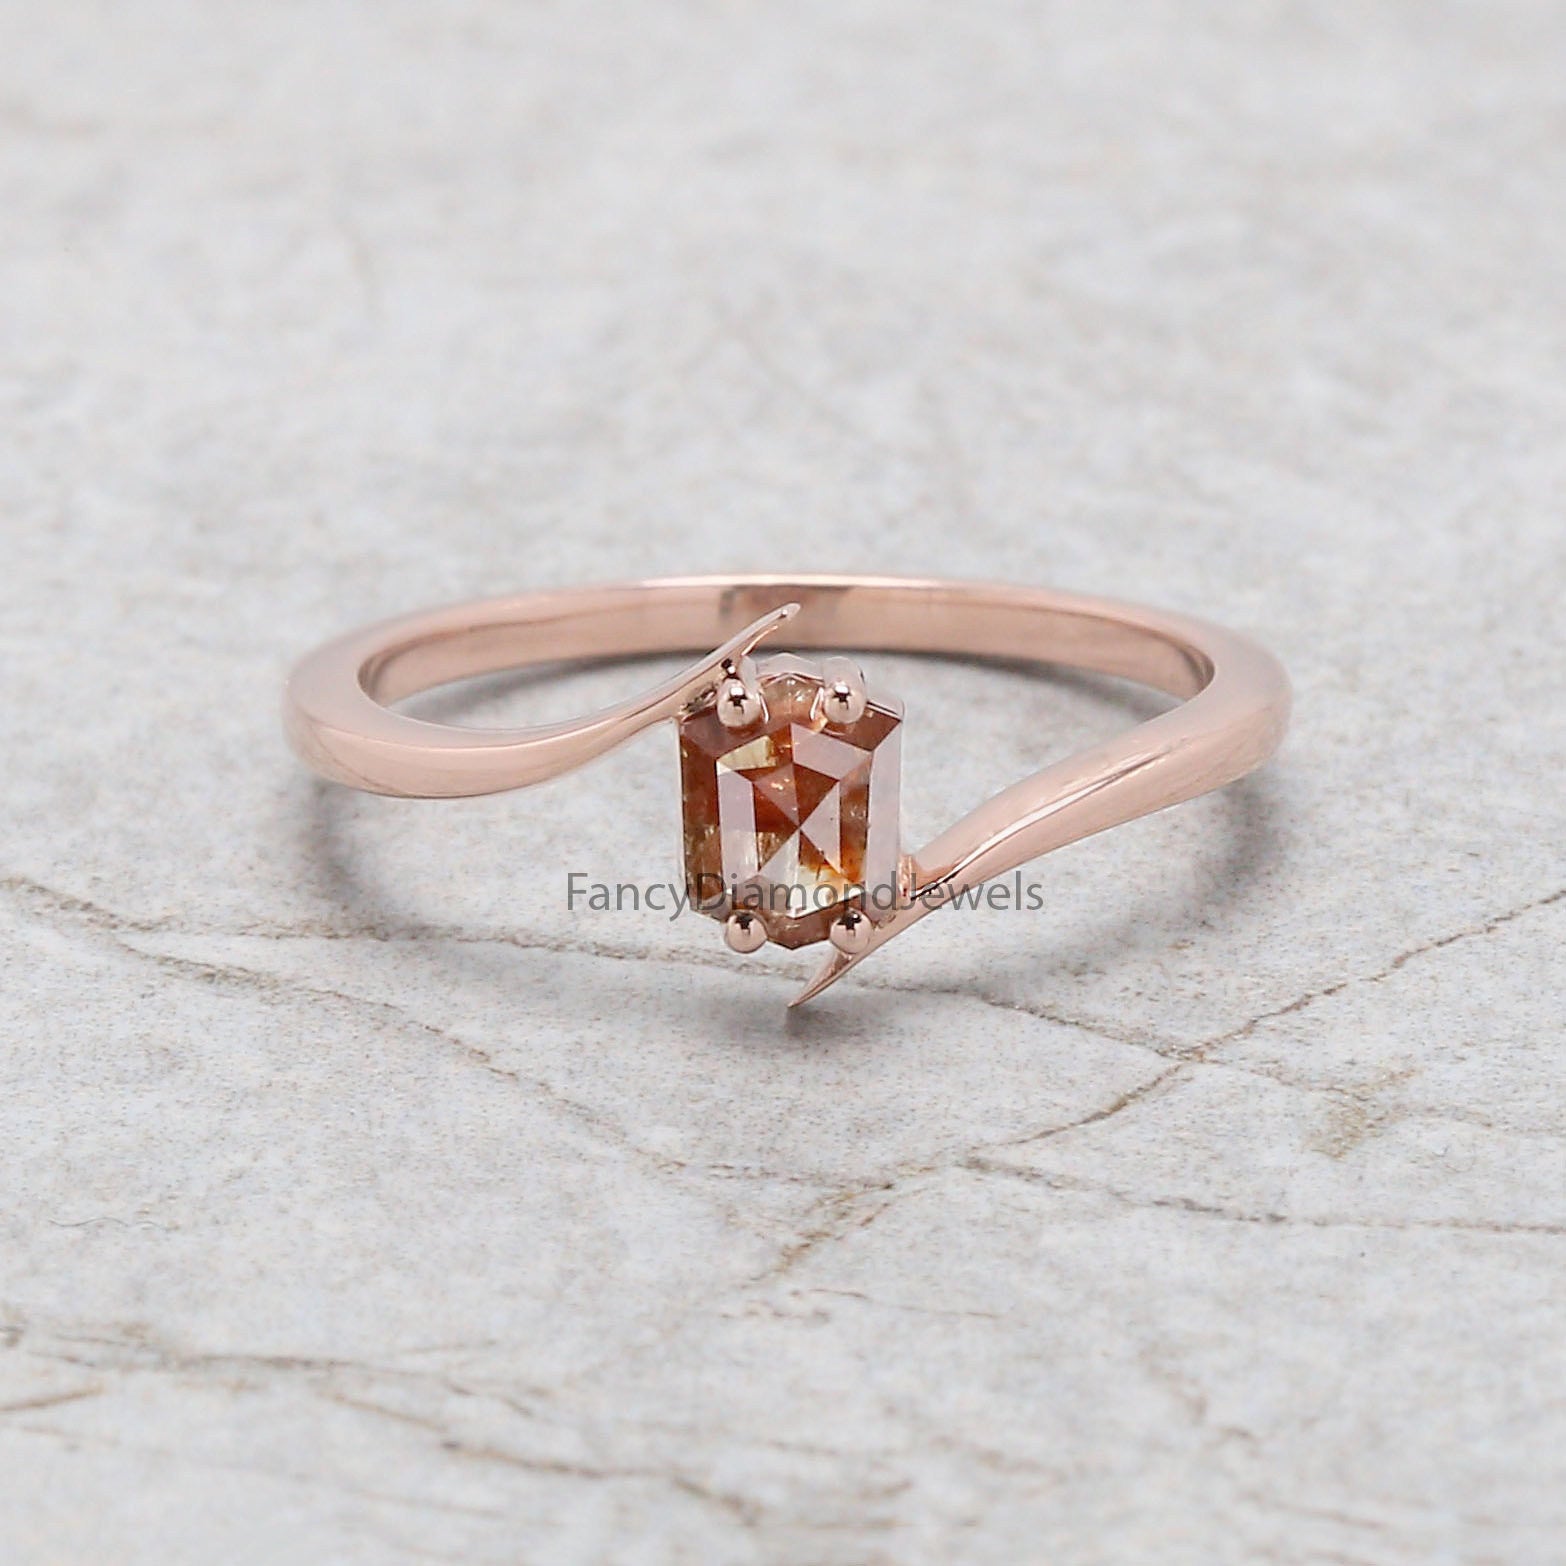 Hexagon Brown Color Diamond Ring 0.46 Ct 5.29 MM Hexagon Shape Diamond Ring 14K Solid Rose Gold Silver Engagement Ring Gift For Her QK2594